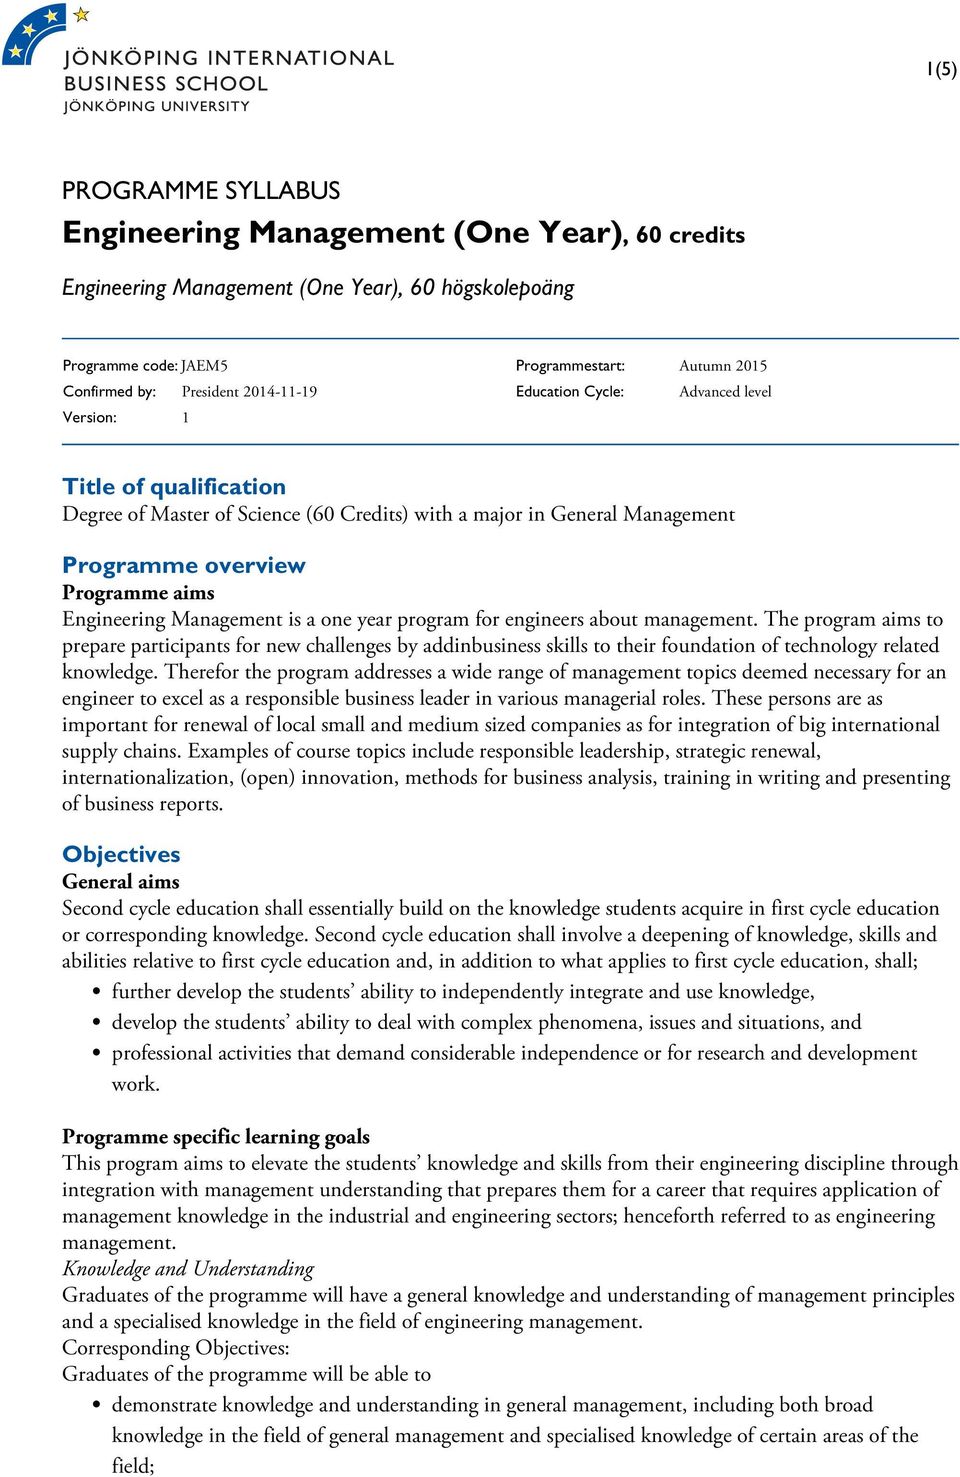 Engineering Management is a one year program for engineers about management.